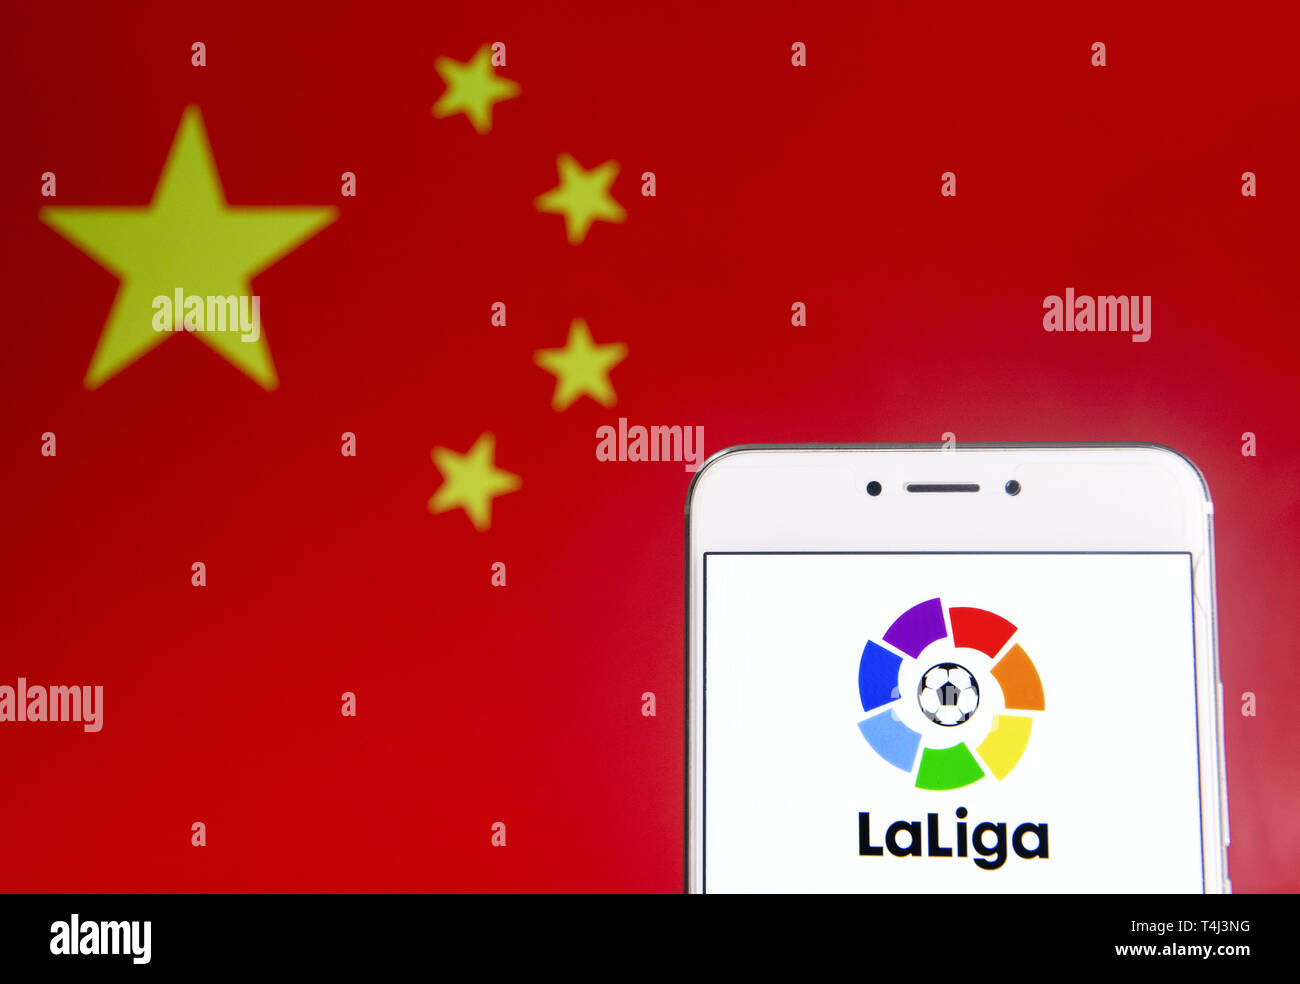 April 6 2019 Hong Kong In This Photo Illustration A Spanish Professional Football League La Liga Logo Is Seen On An Android Mobile Device With People S Republic Of China Flag